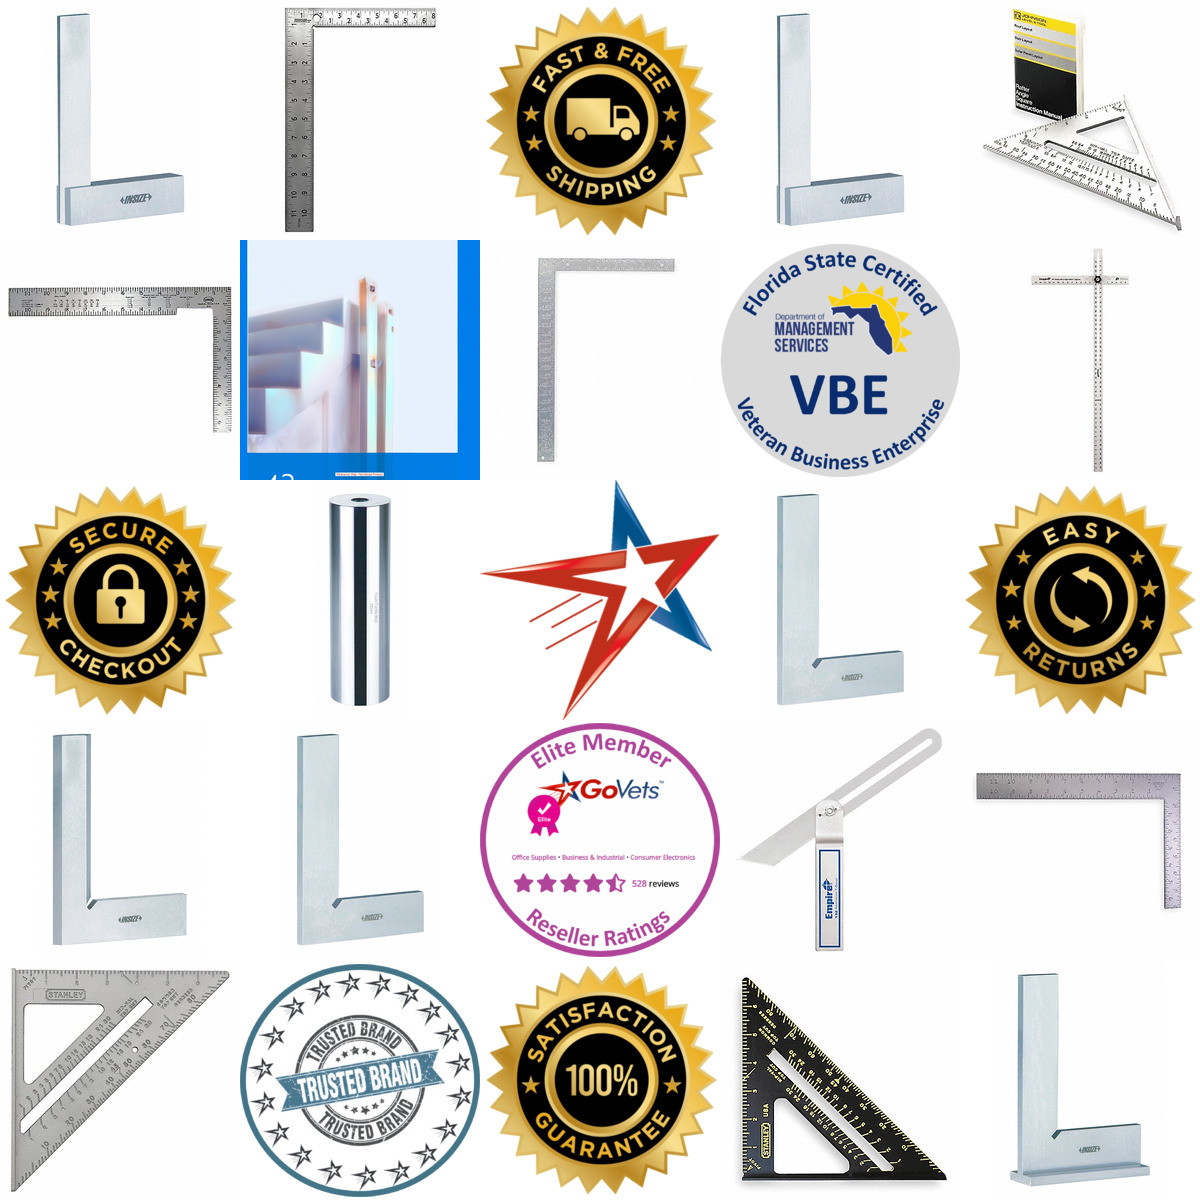 A selection of Squares Bevels and Stair Gauges products on GoVets